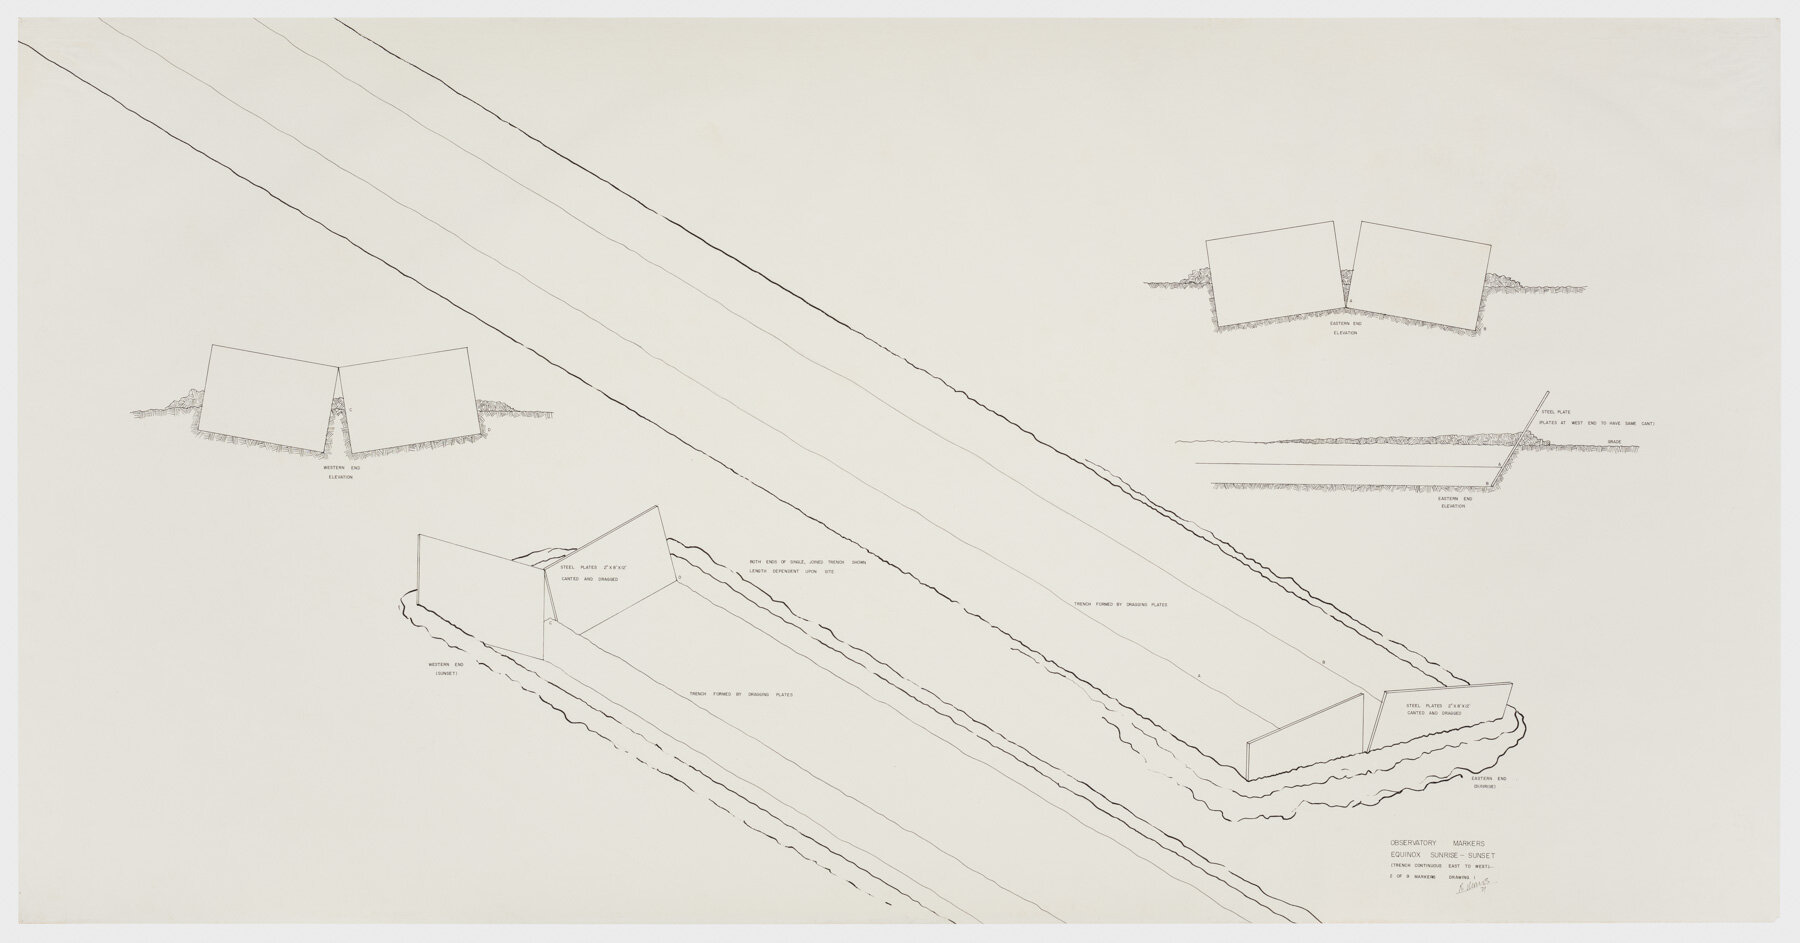  Robert Morris . Observatory Markers, Equinox Sunrise–Sunset , 1971. Ink on paper, 42 x 82 ½ in. (107 x 210 cm). Estate of Robert Morris, courtesy Castelli Gallery, New York. © 2019 The Estate of Robert Morris / Artists Rights Society (ARS), New York